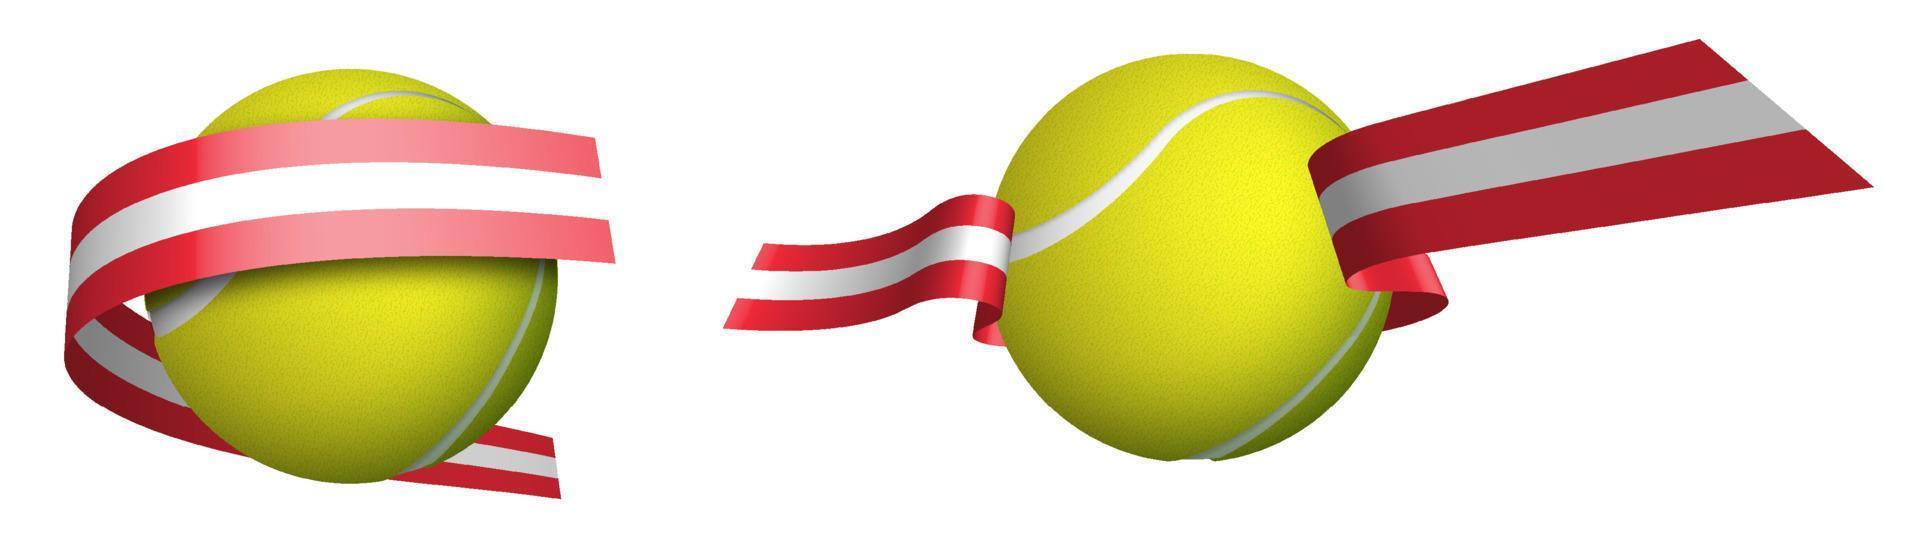 sports tennis ball in ribbons with colors Austrian flag. Rating of athletes in tennis. Isolated vector on white background